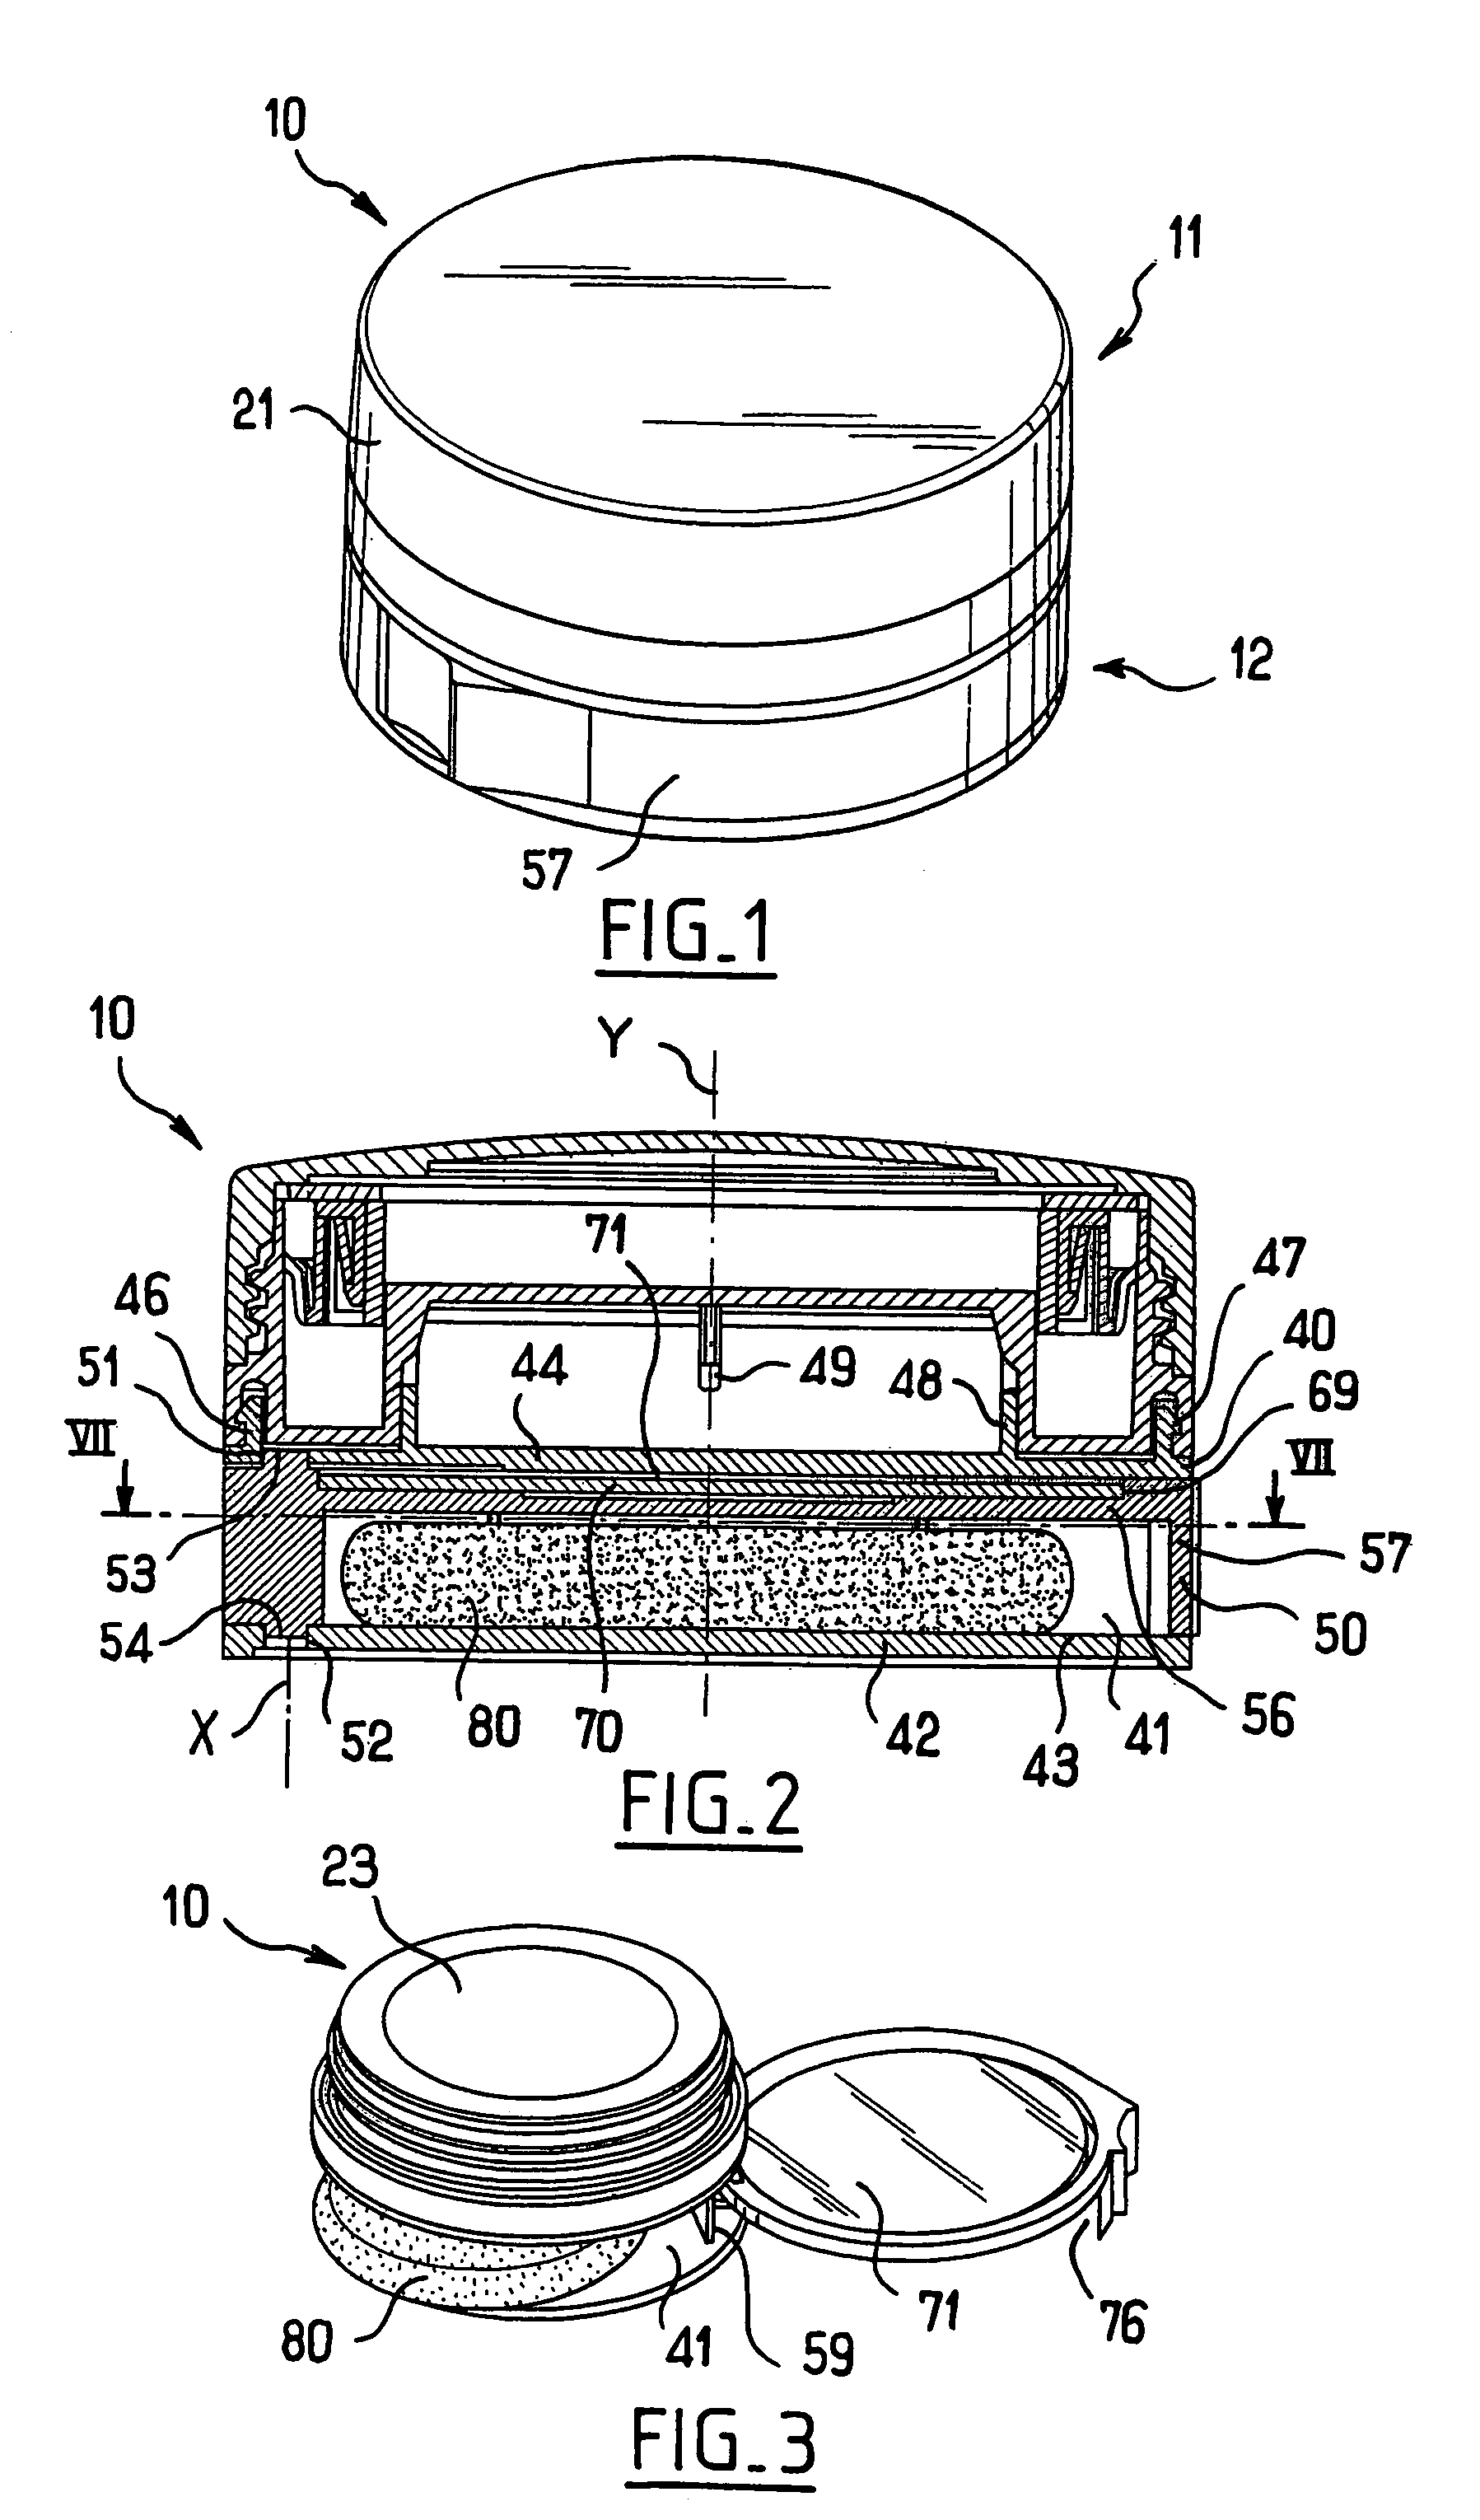 Device for packaging and applying a substance such as a cosmetic or another care product